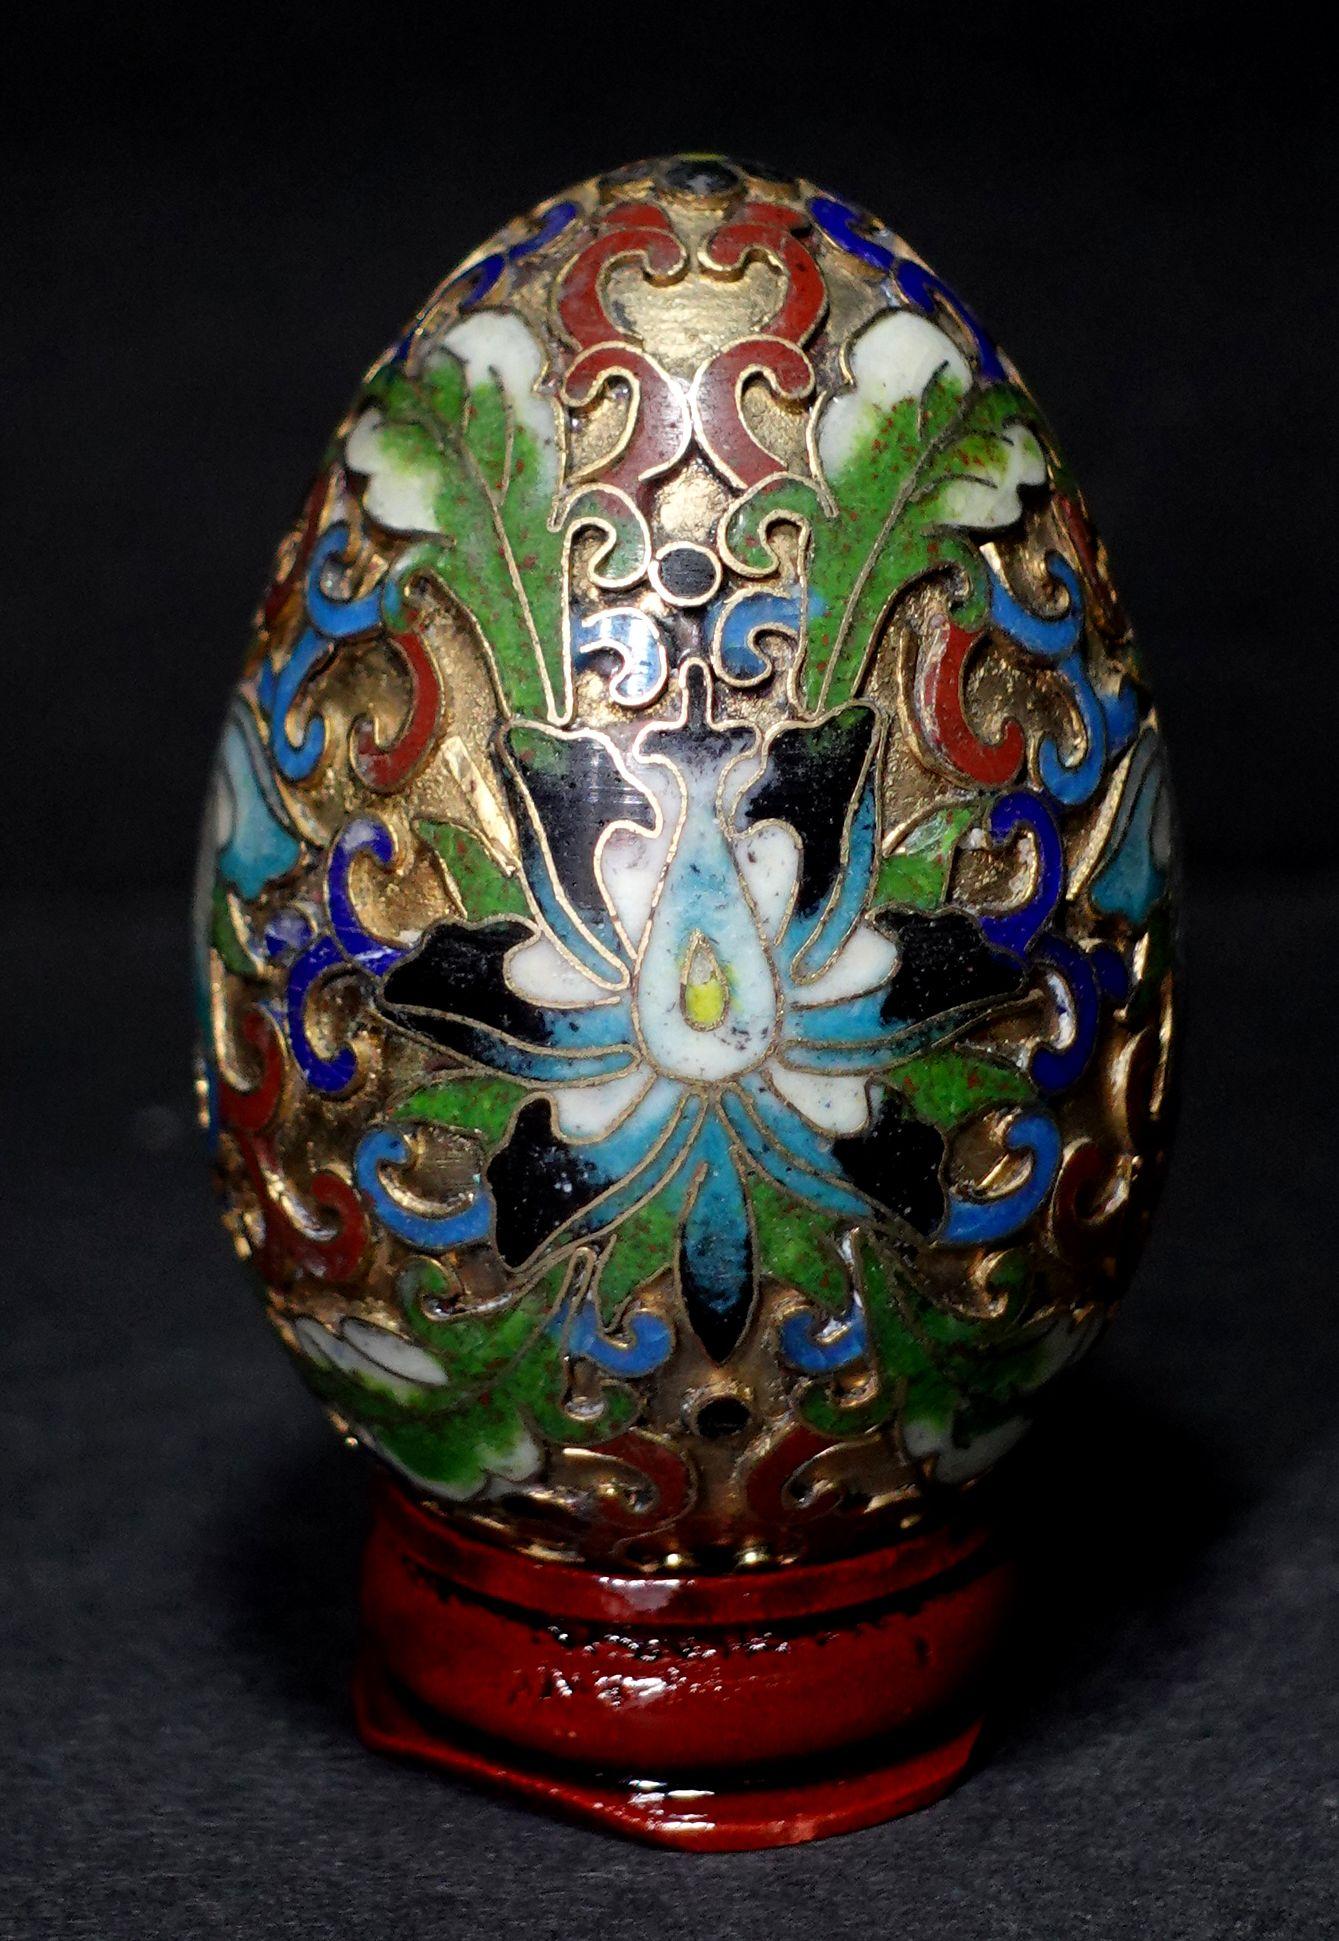 Presenting a beautiful Chinese cloisonné enamel egg depicting flora theme with a wood stand, early 20th century. #5